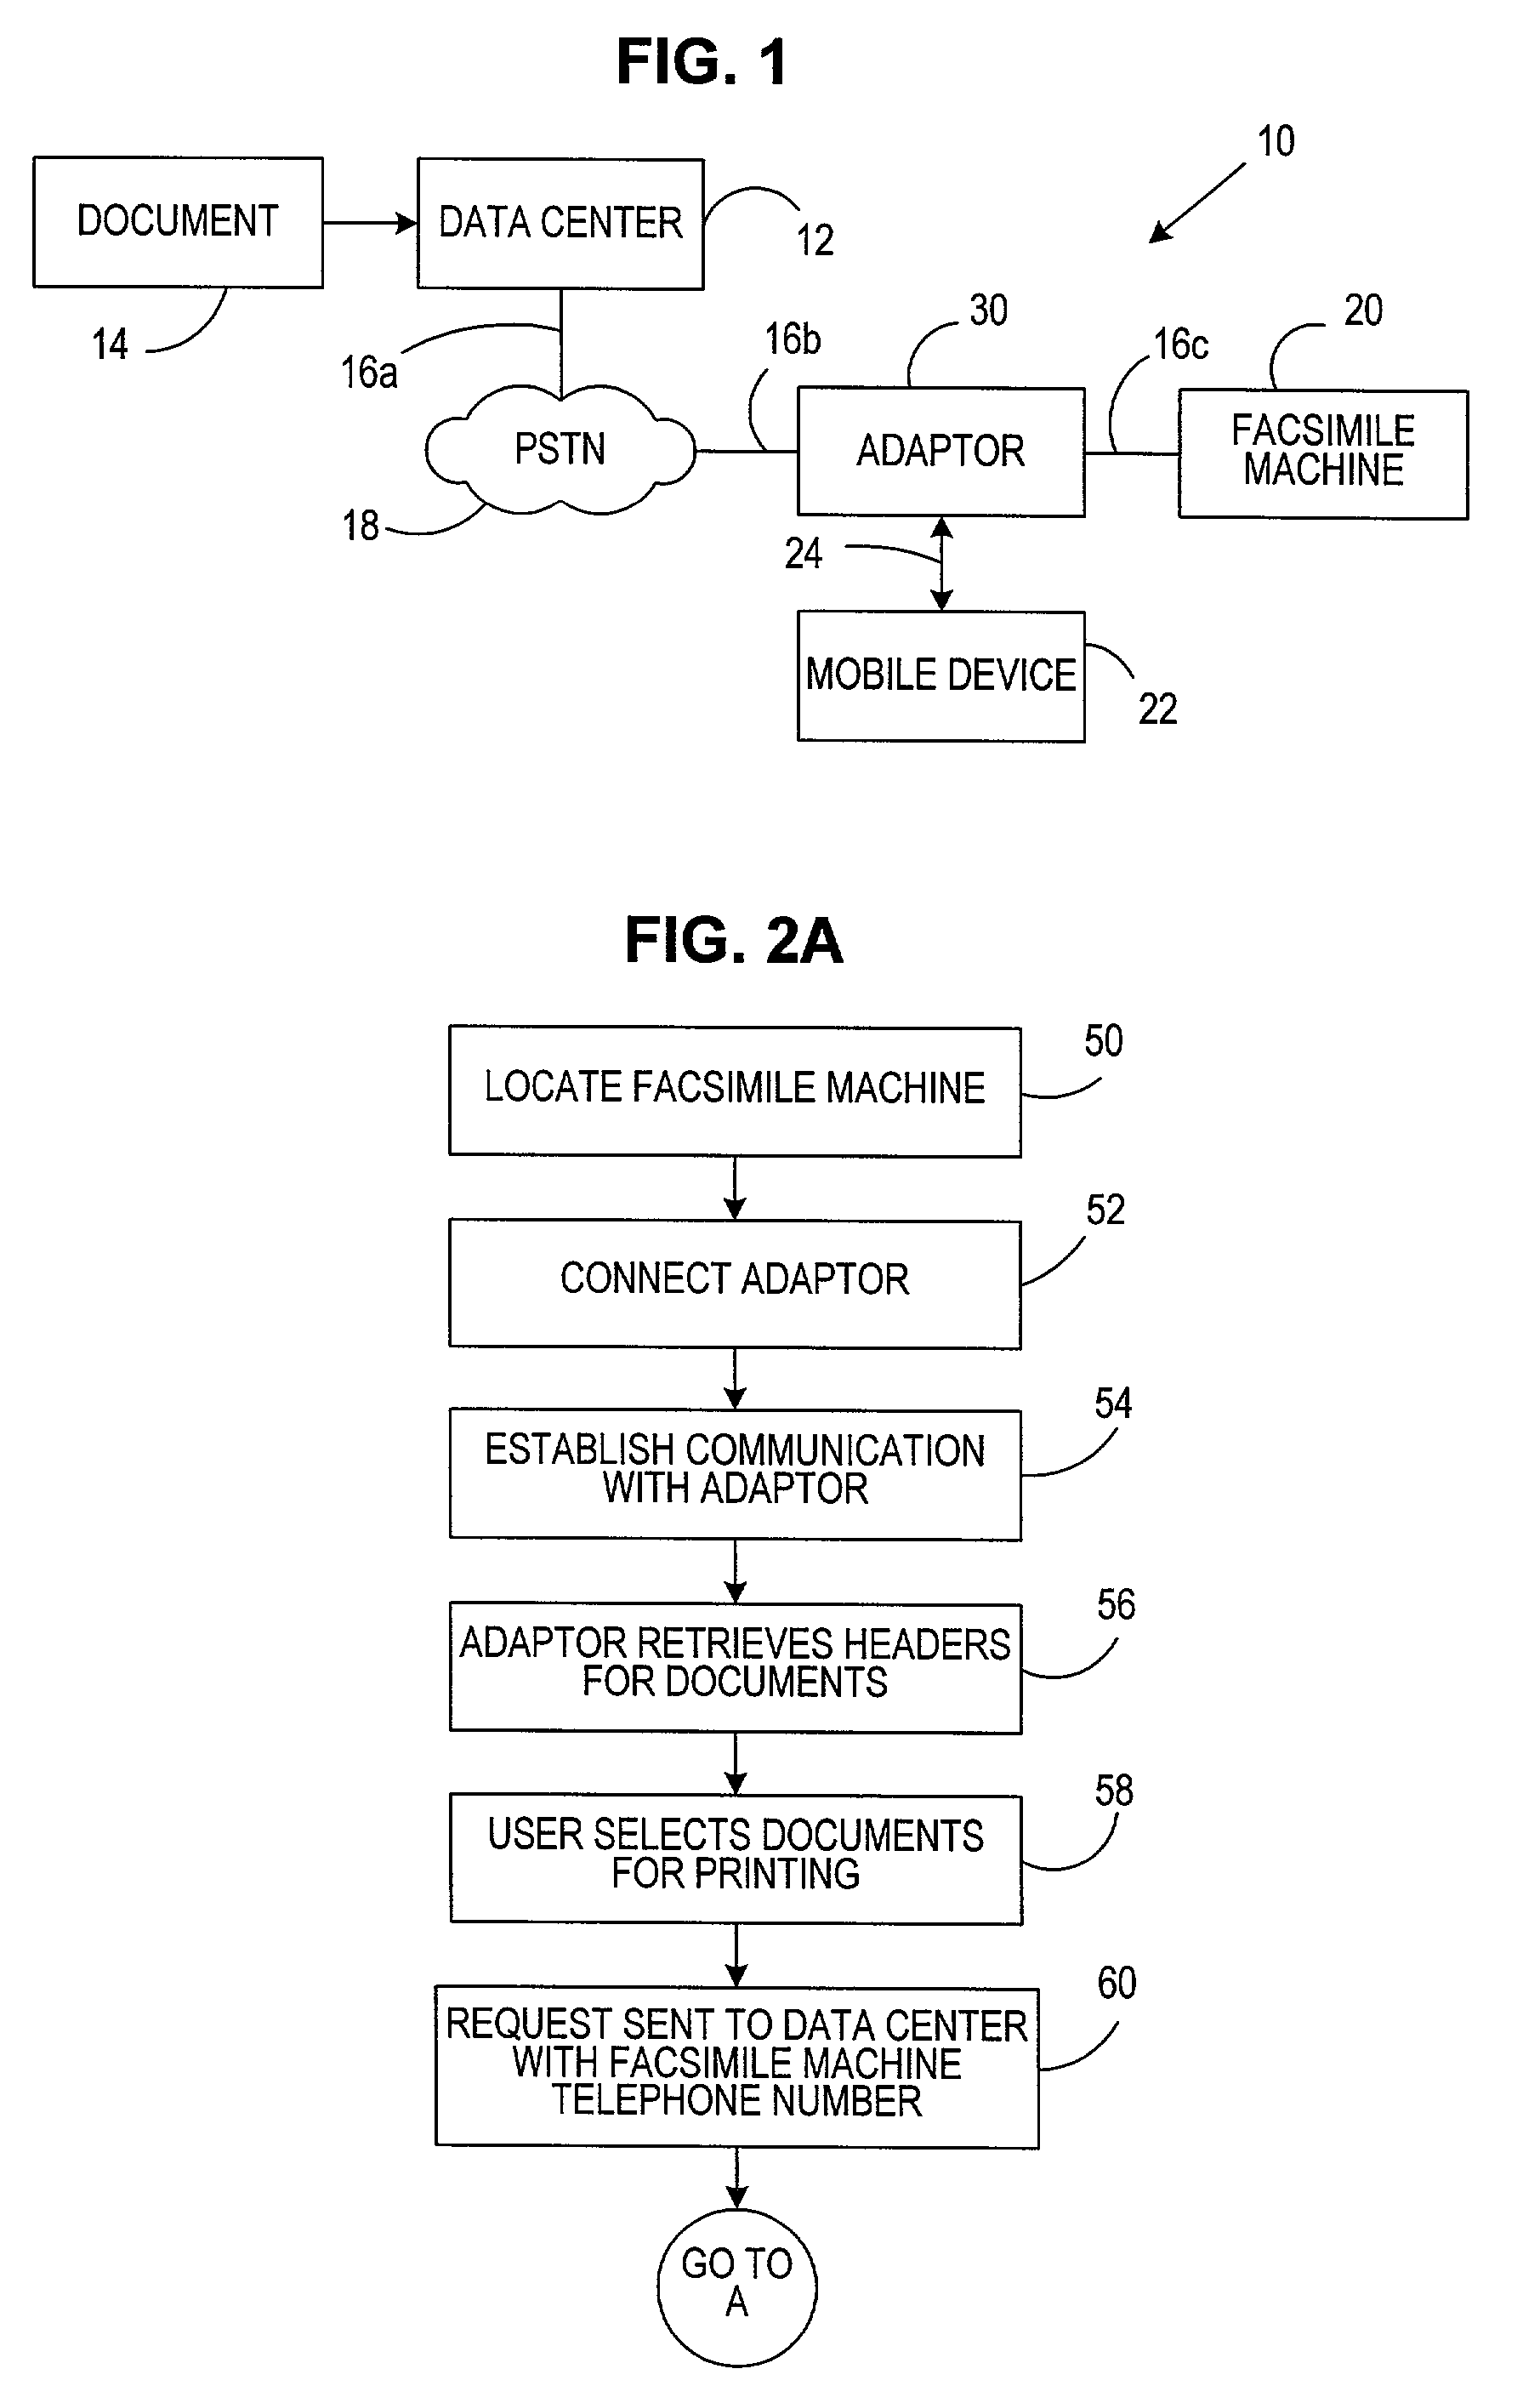 Method and system for secure delivery and retrieval of documents utilizing a facsimile machine